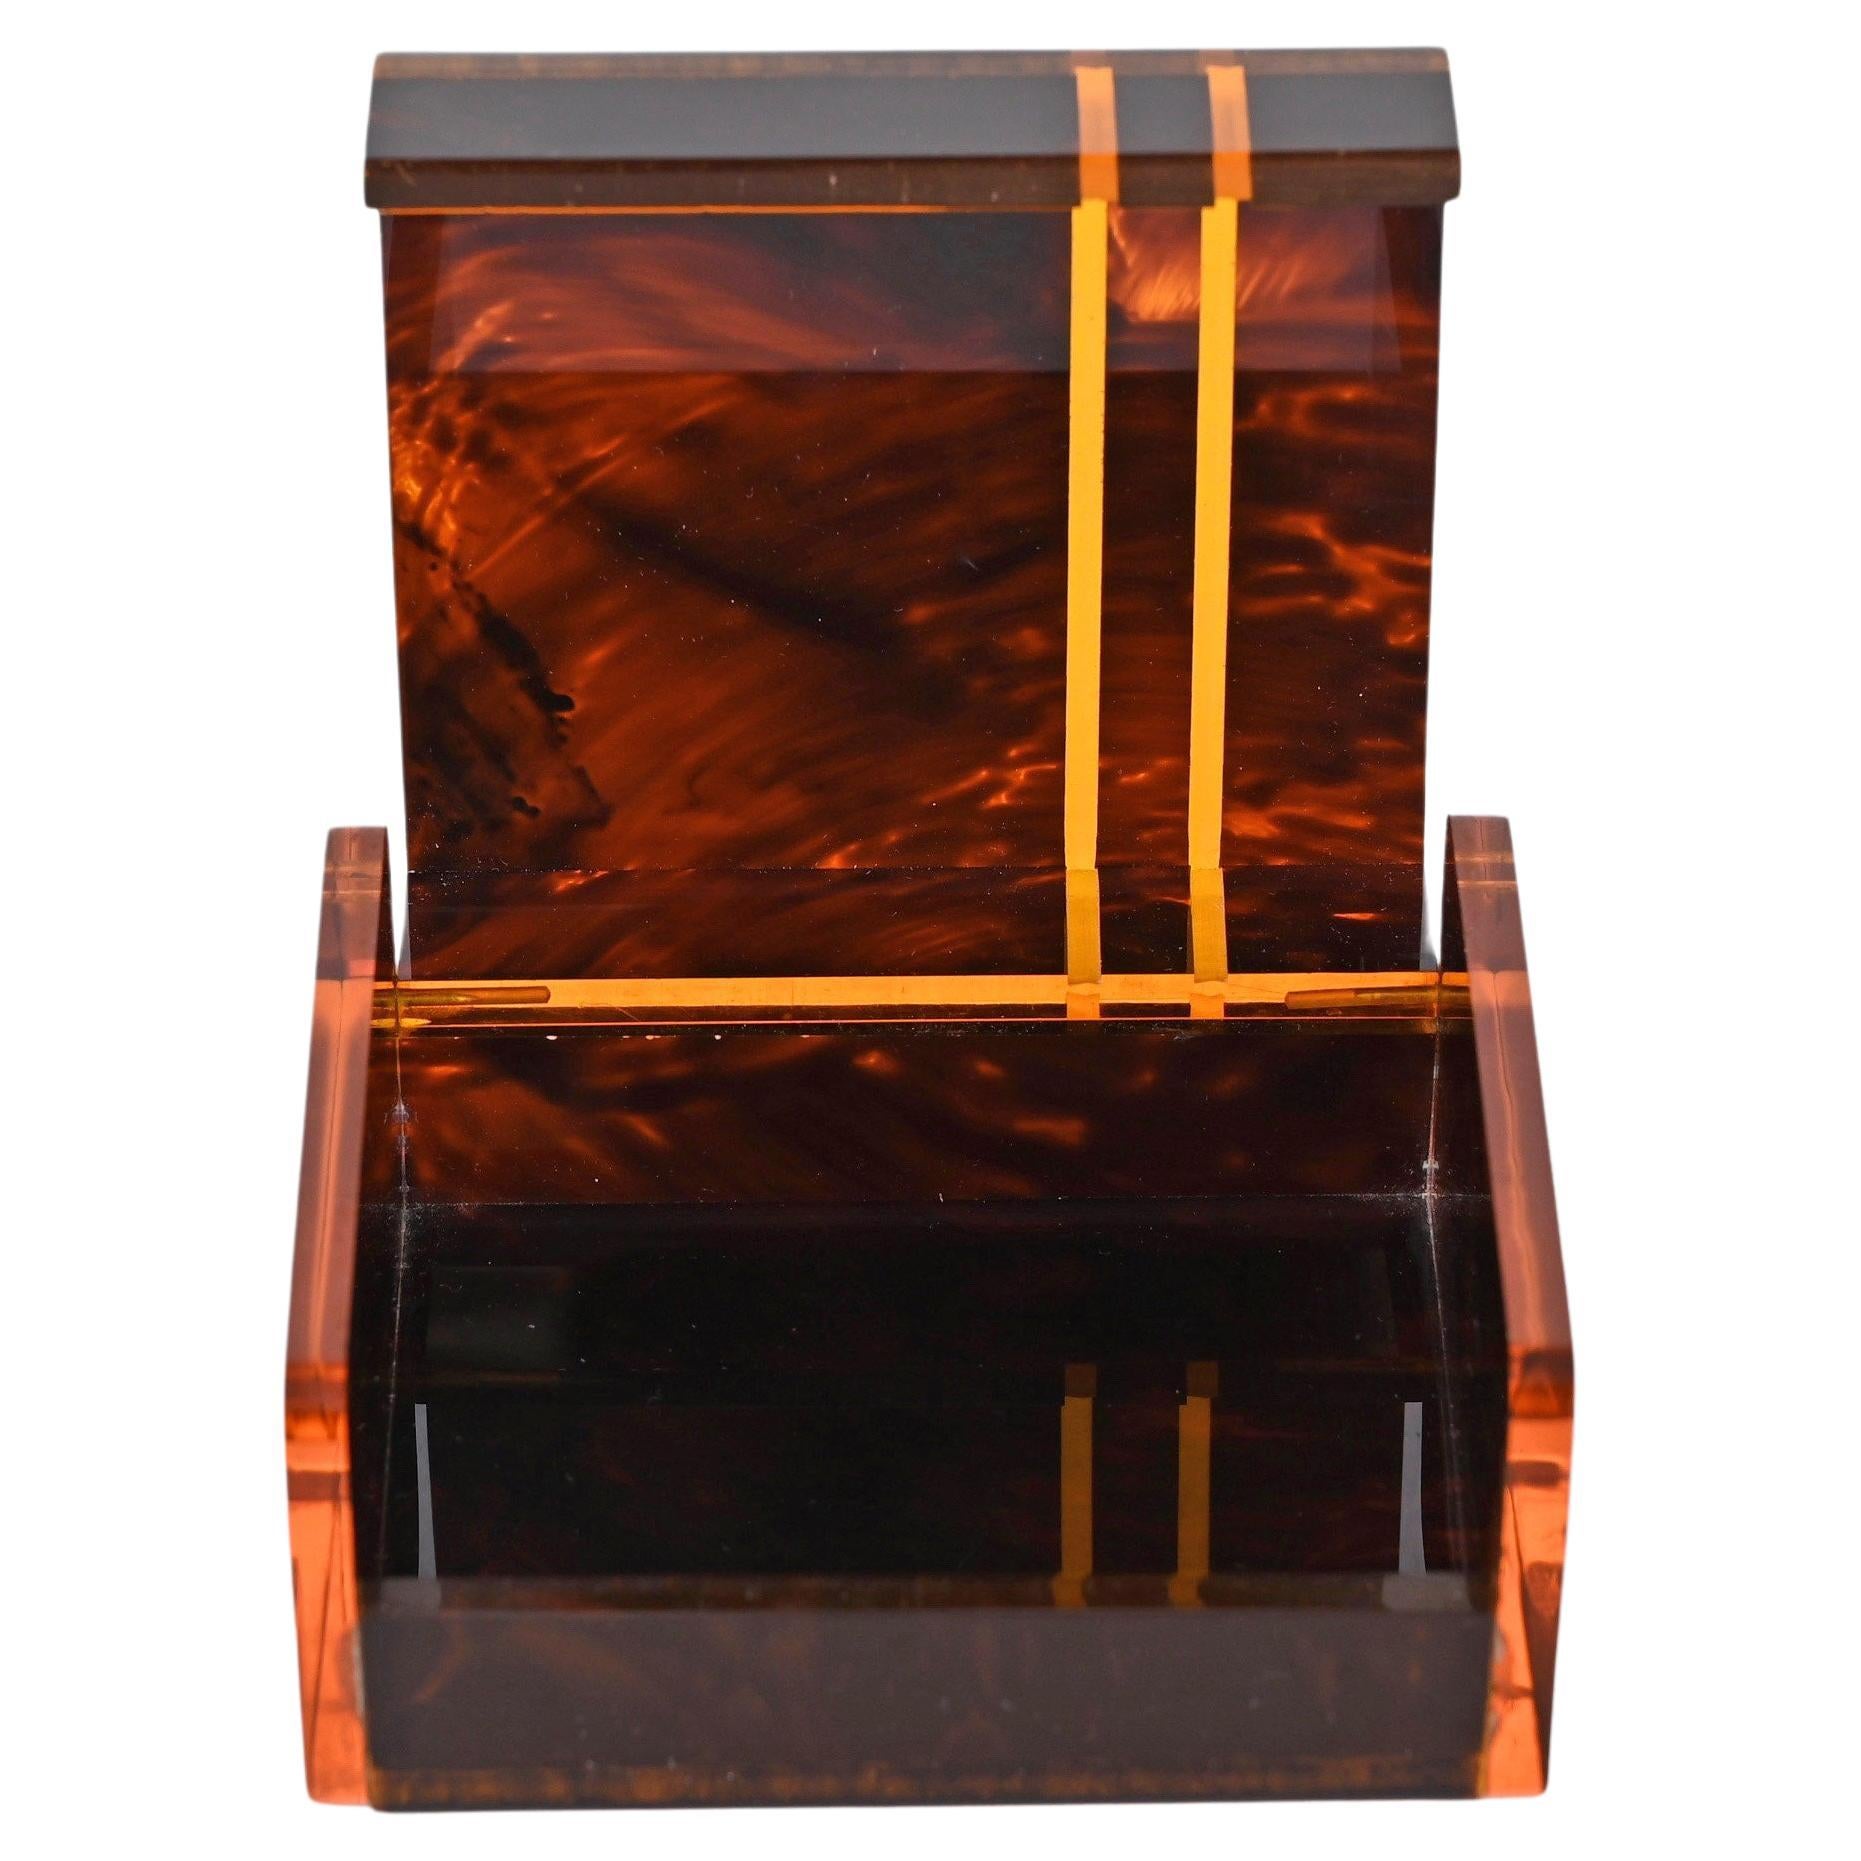 Wonderful midcentury lucite jewellery case, with marvellous tortoise effect. This astonishing piece was produced in France during the 1970s following Christian Dior style.

This item is timeless as the simplicity and elegance of its lines represent